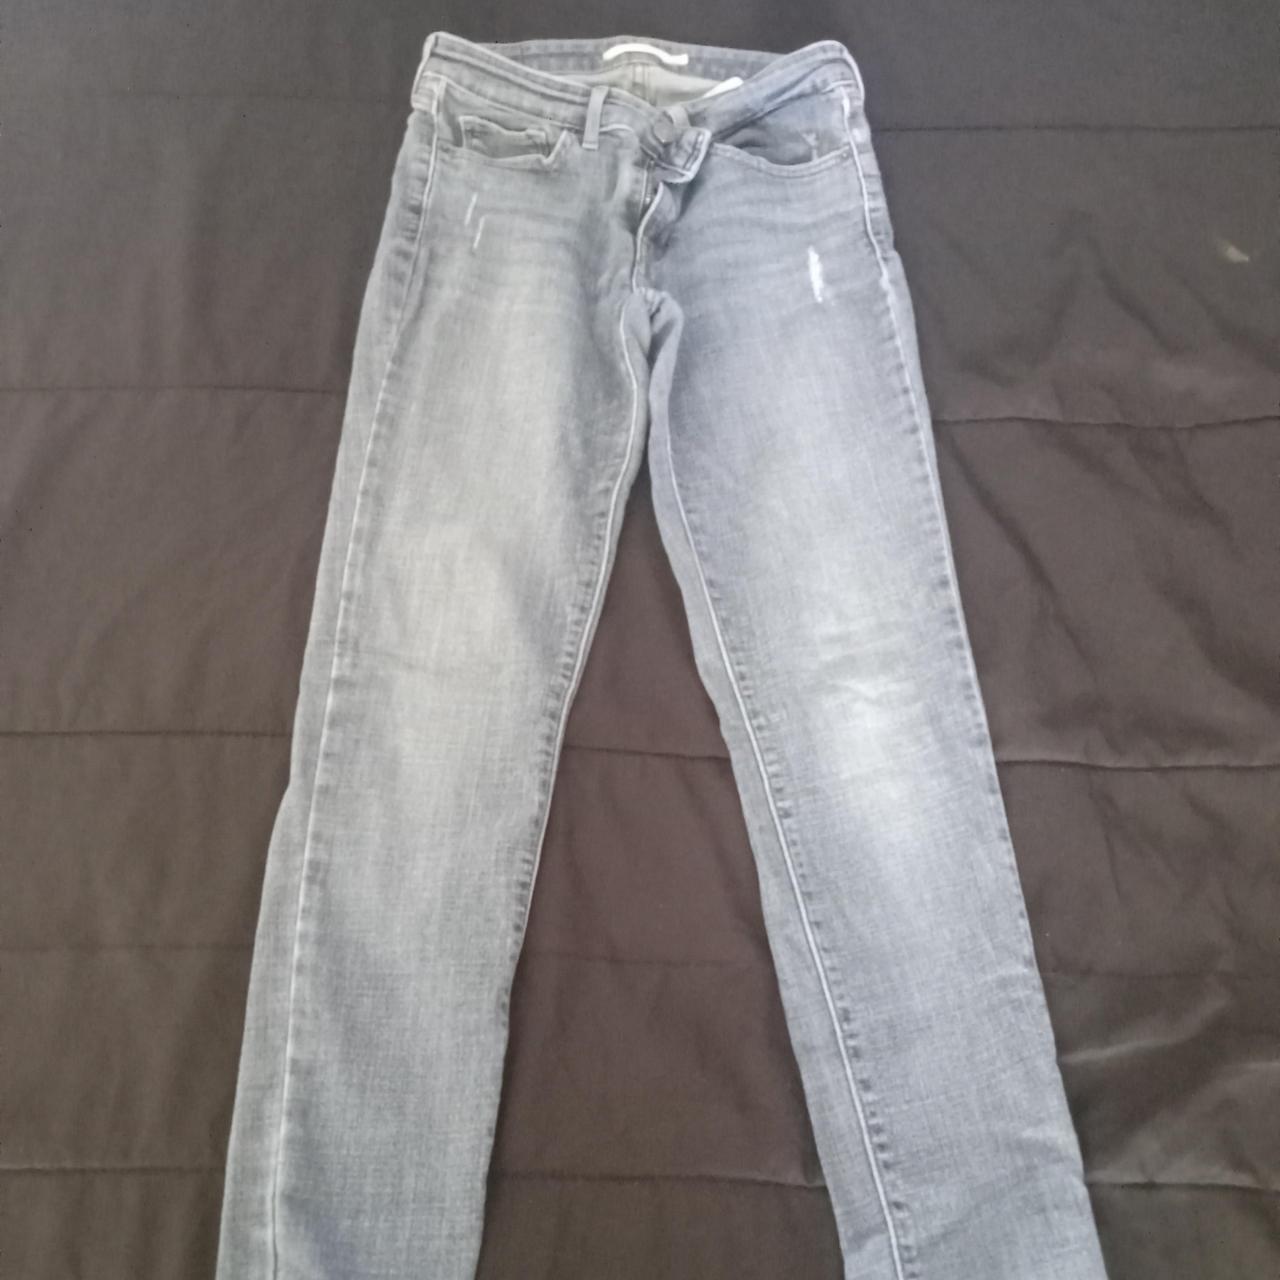 Woman's 711 Levi's Skinny Same as shown in pics 35... - Depop